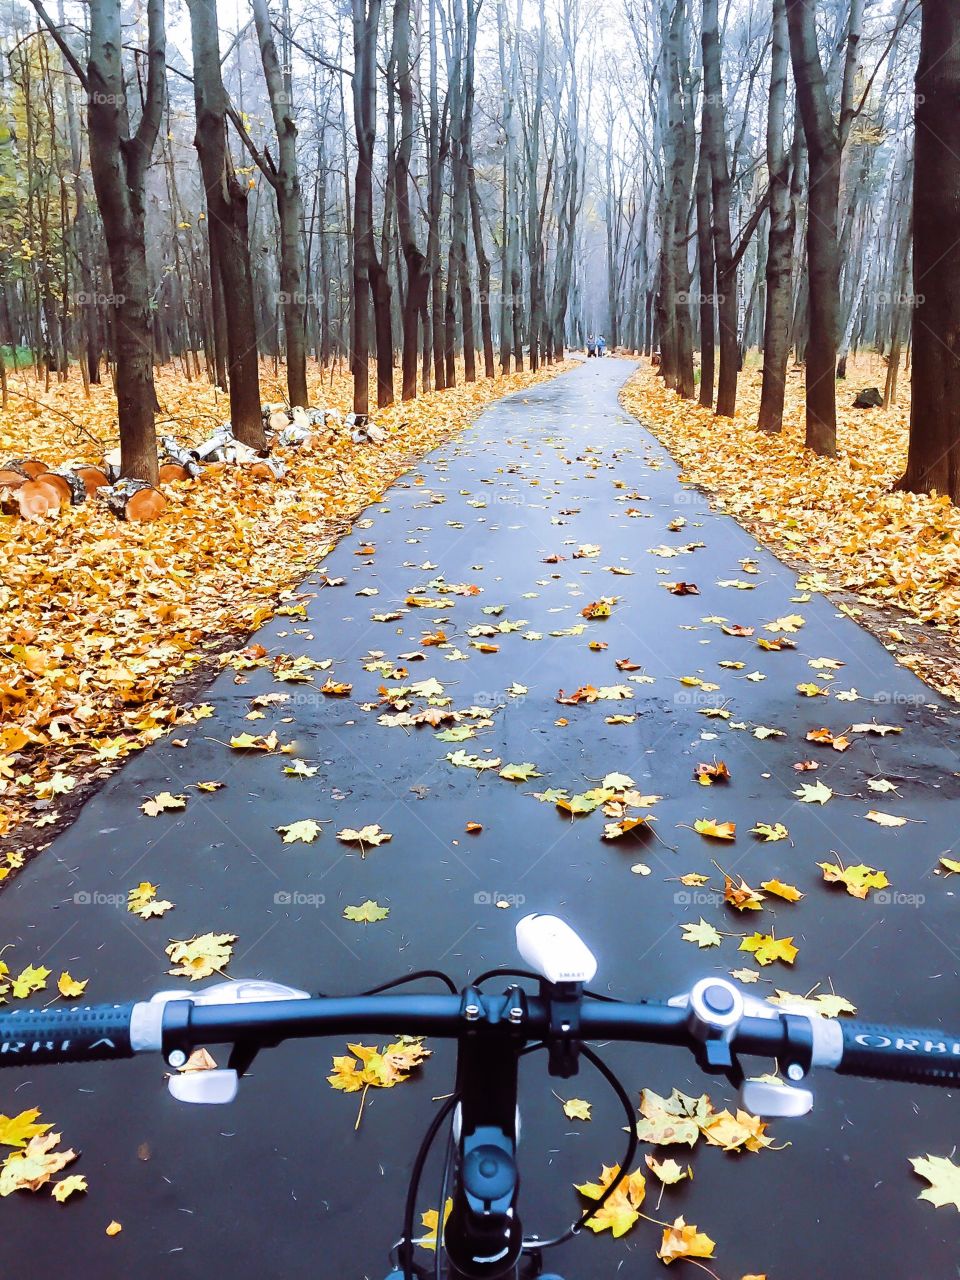 On a bicycle in the part in the fall